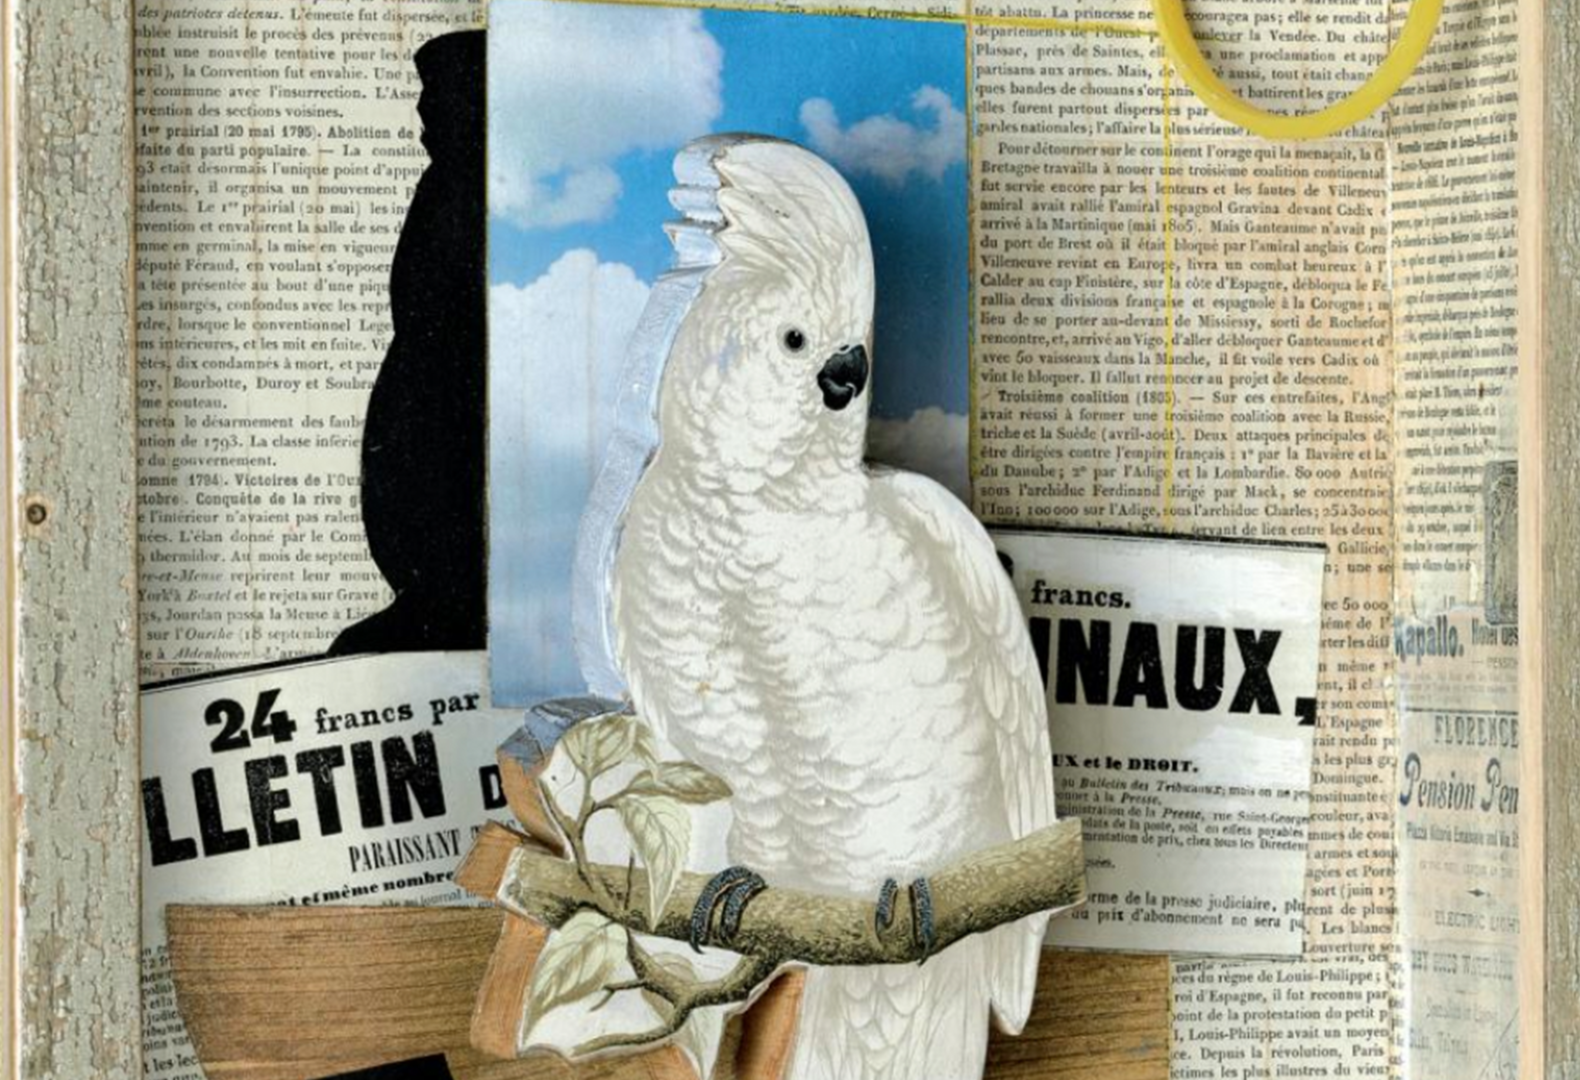 One of Joseph Cornell's shadow boxes containing the image of a white-crested cockatoo backed by newspaper clippings